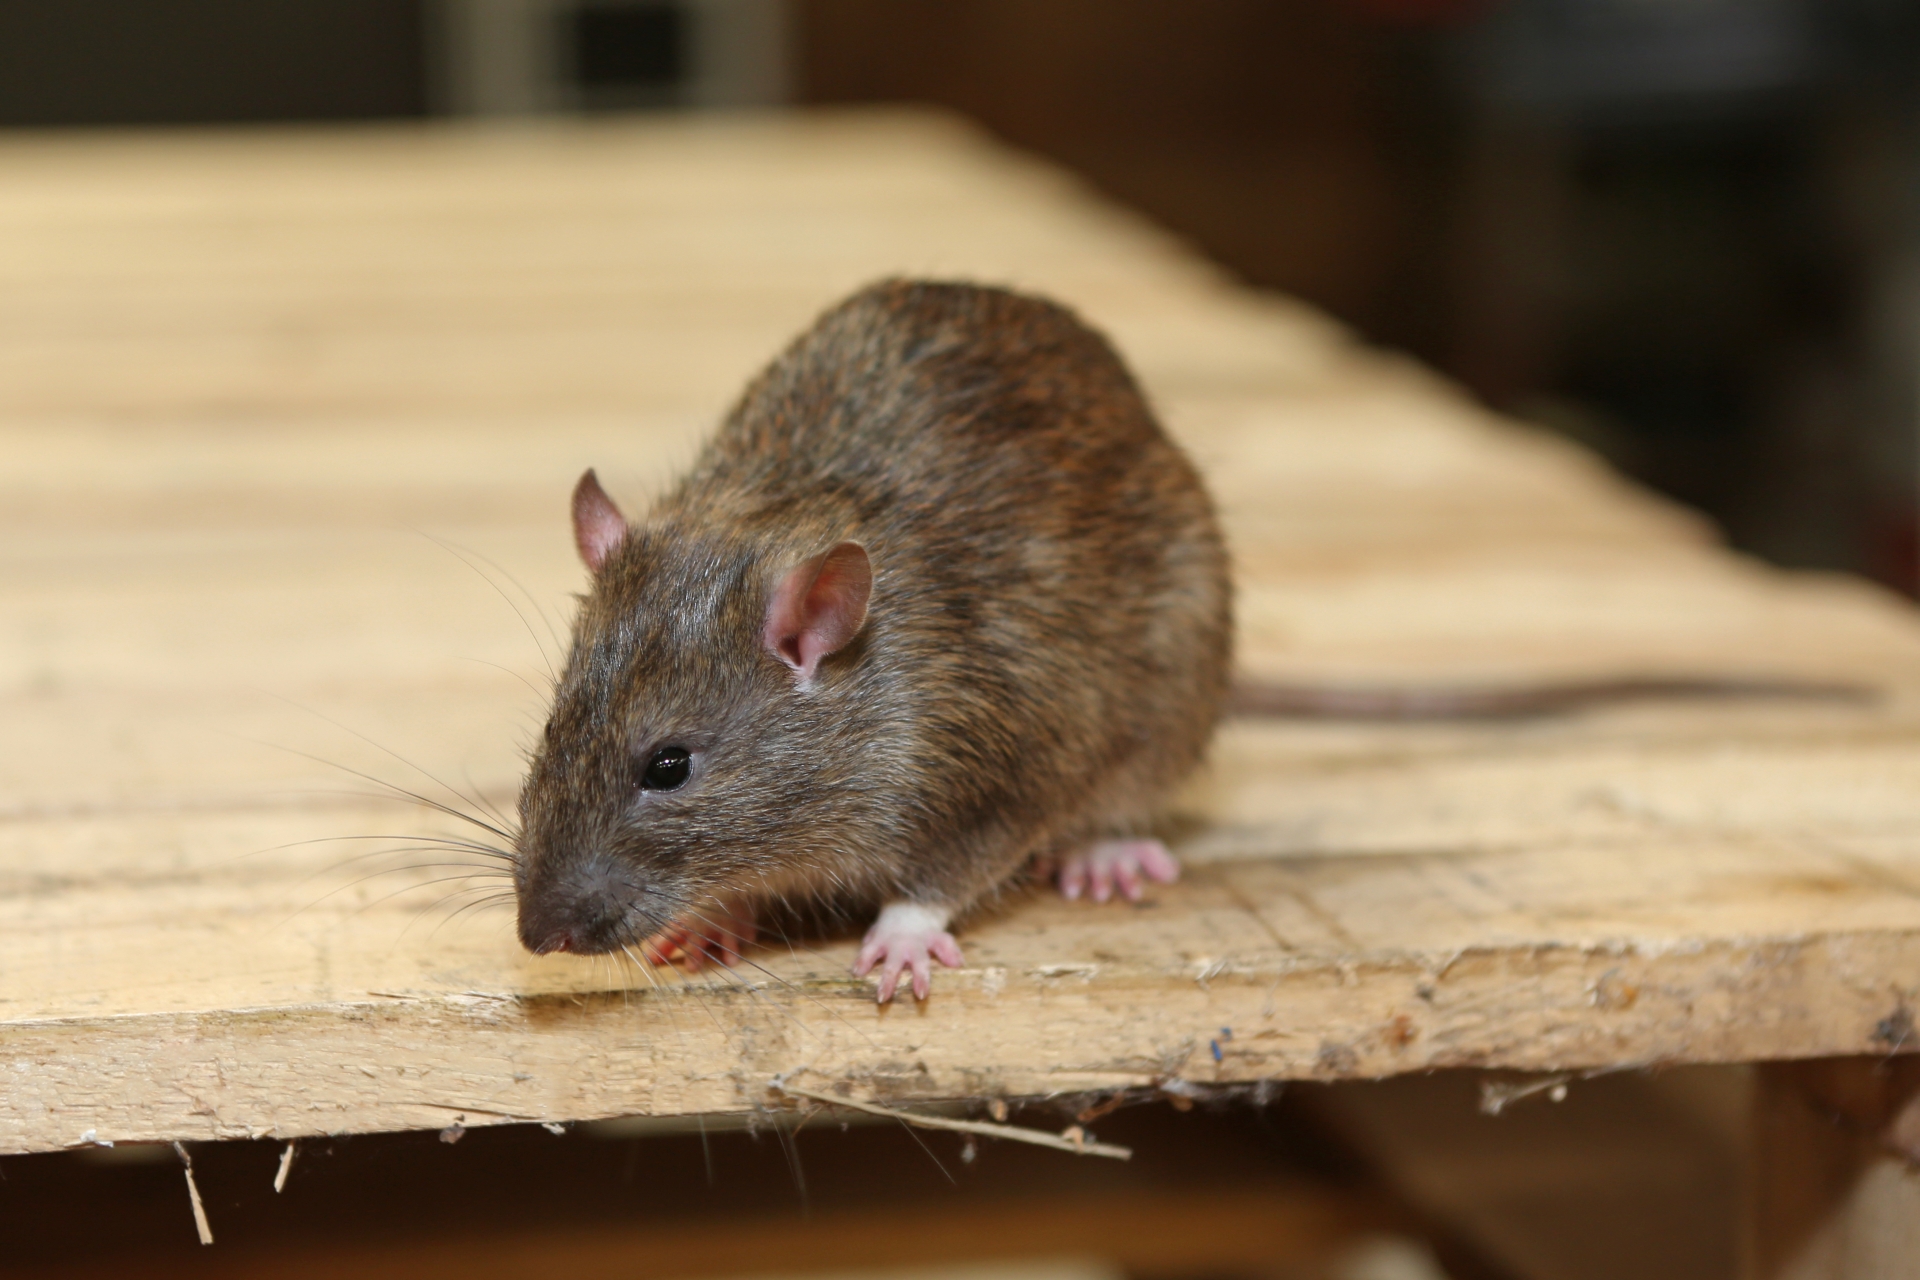 Rat Infestation, Pest Control in Abbey Wood, SE2. Call Now 020 8166 9746